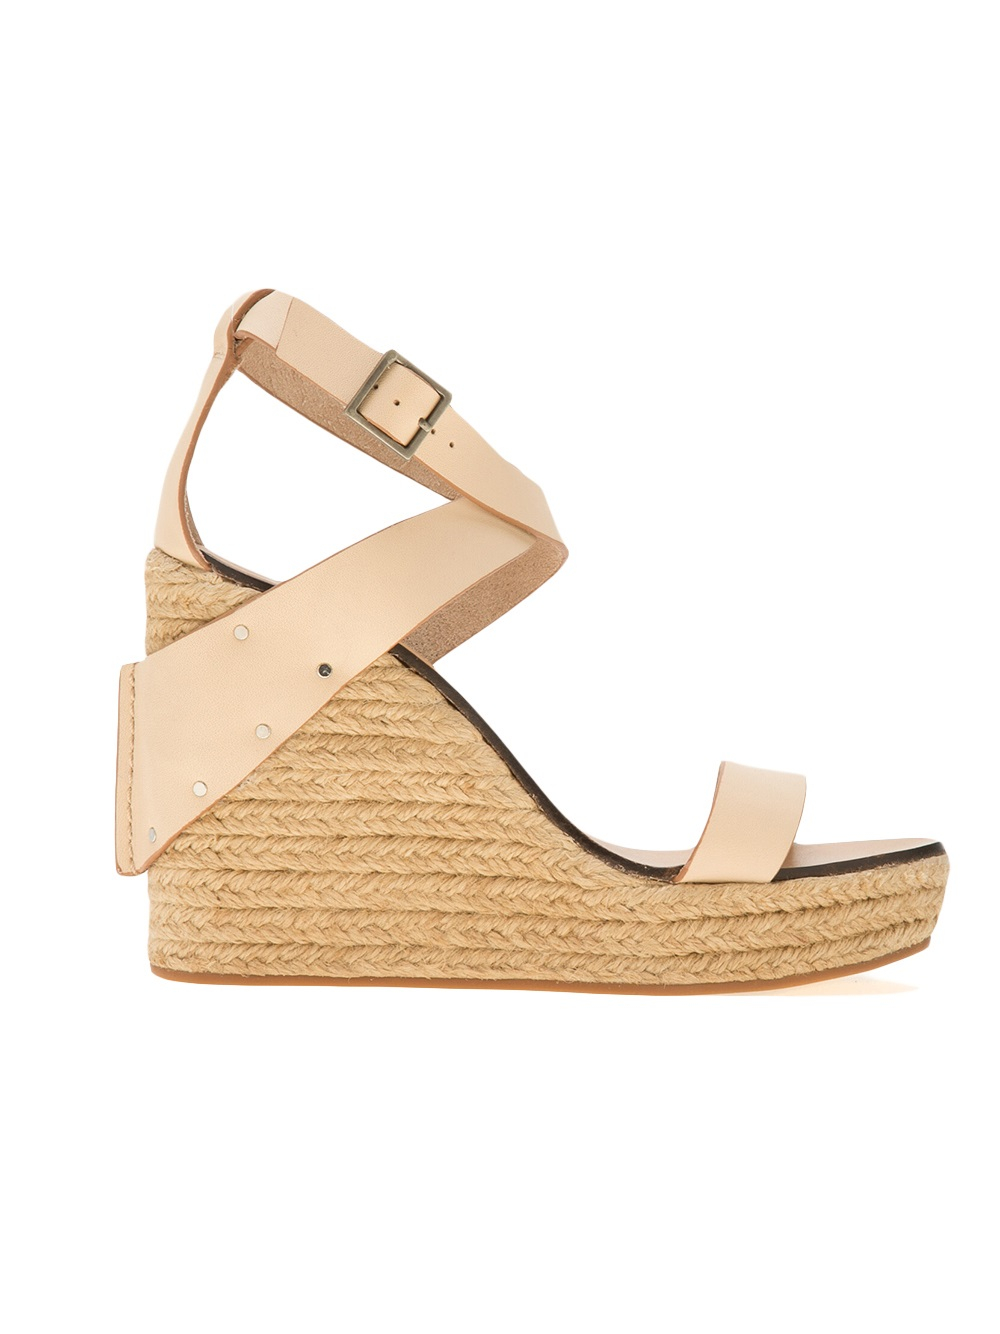 See By Chloé Espadrille Sandal in Natural - Lyst